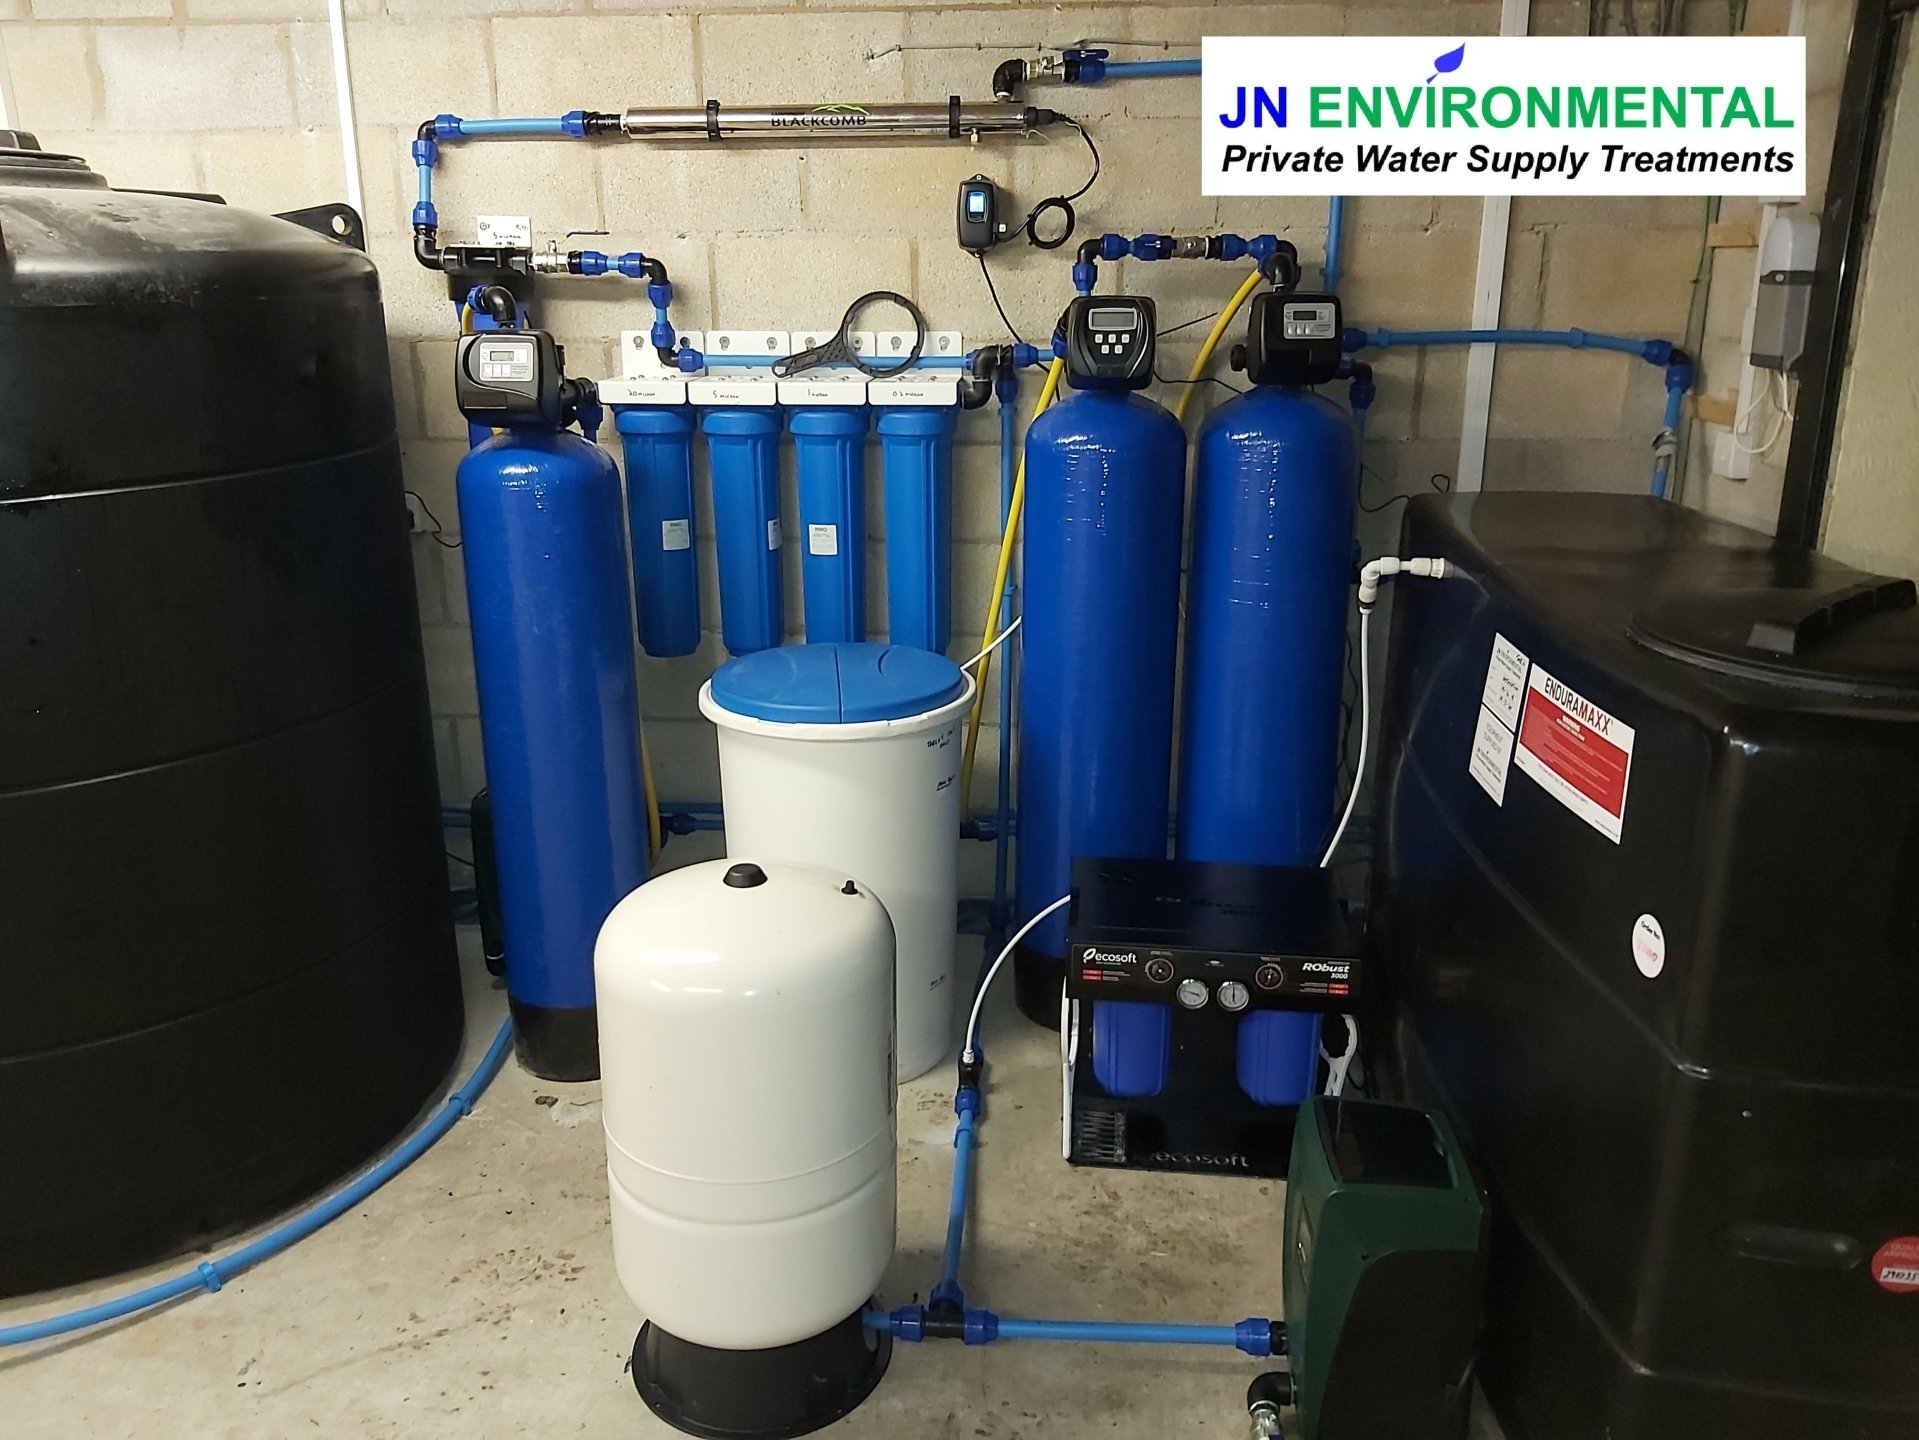 Our Work - Private Water Supply Treatment